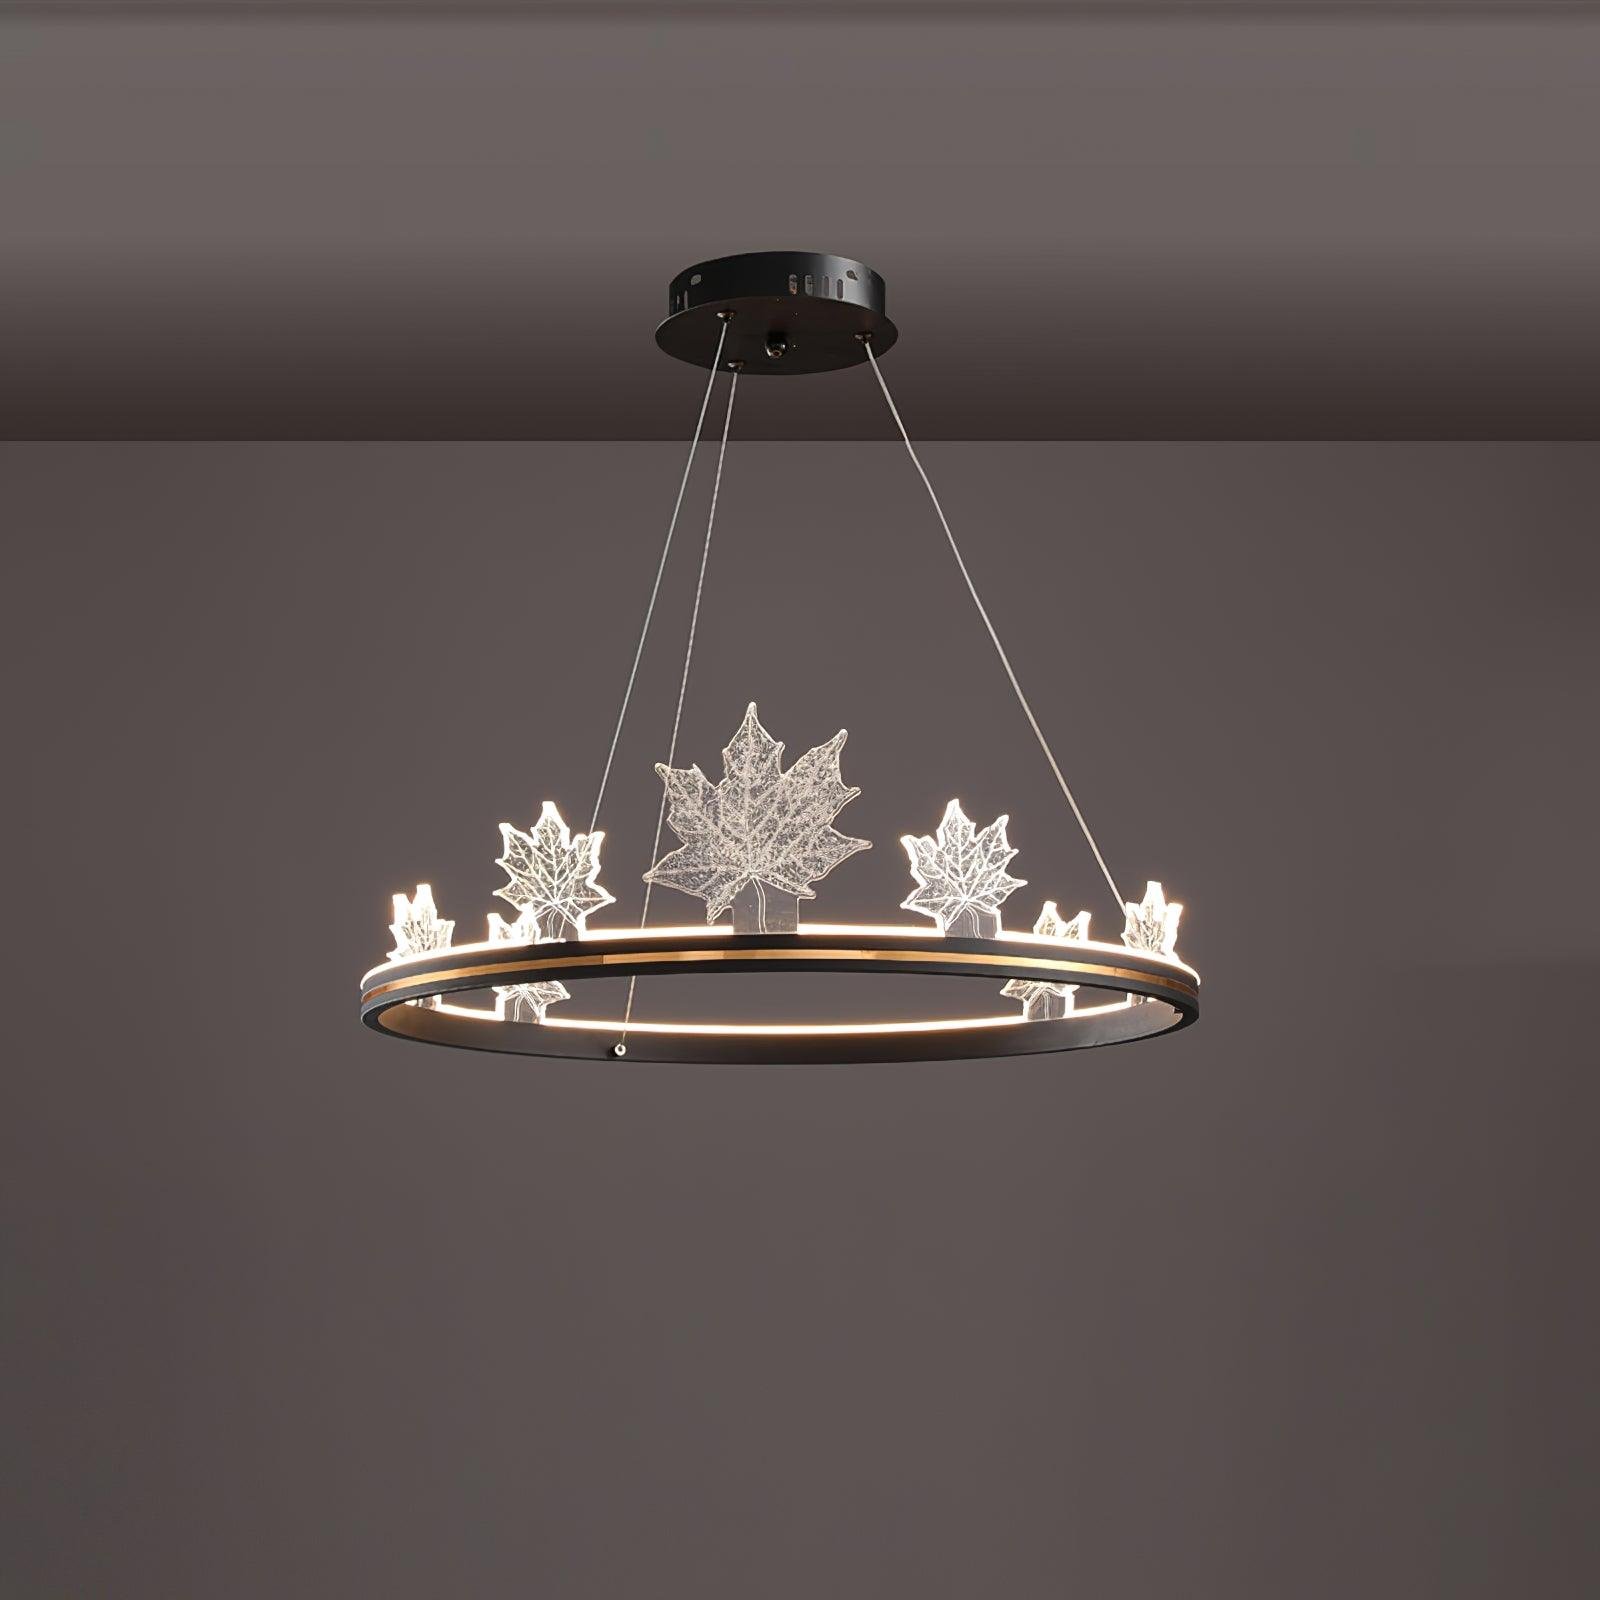 Black Ion Leaf Chandelier with Cool White Light, Diameter 23.6 inches x Height 7 inches (60cm x 18cm)